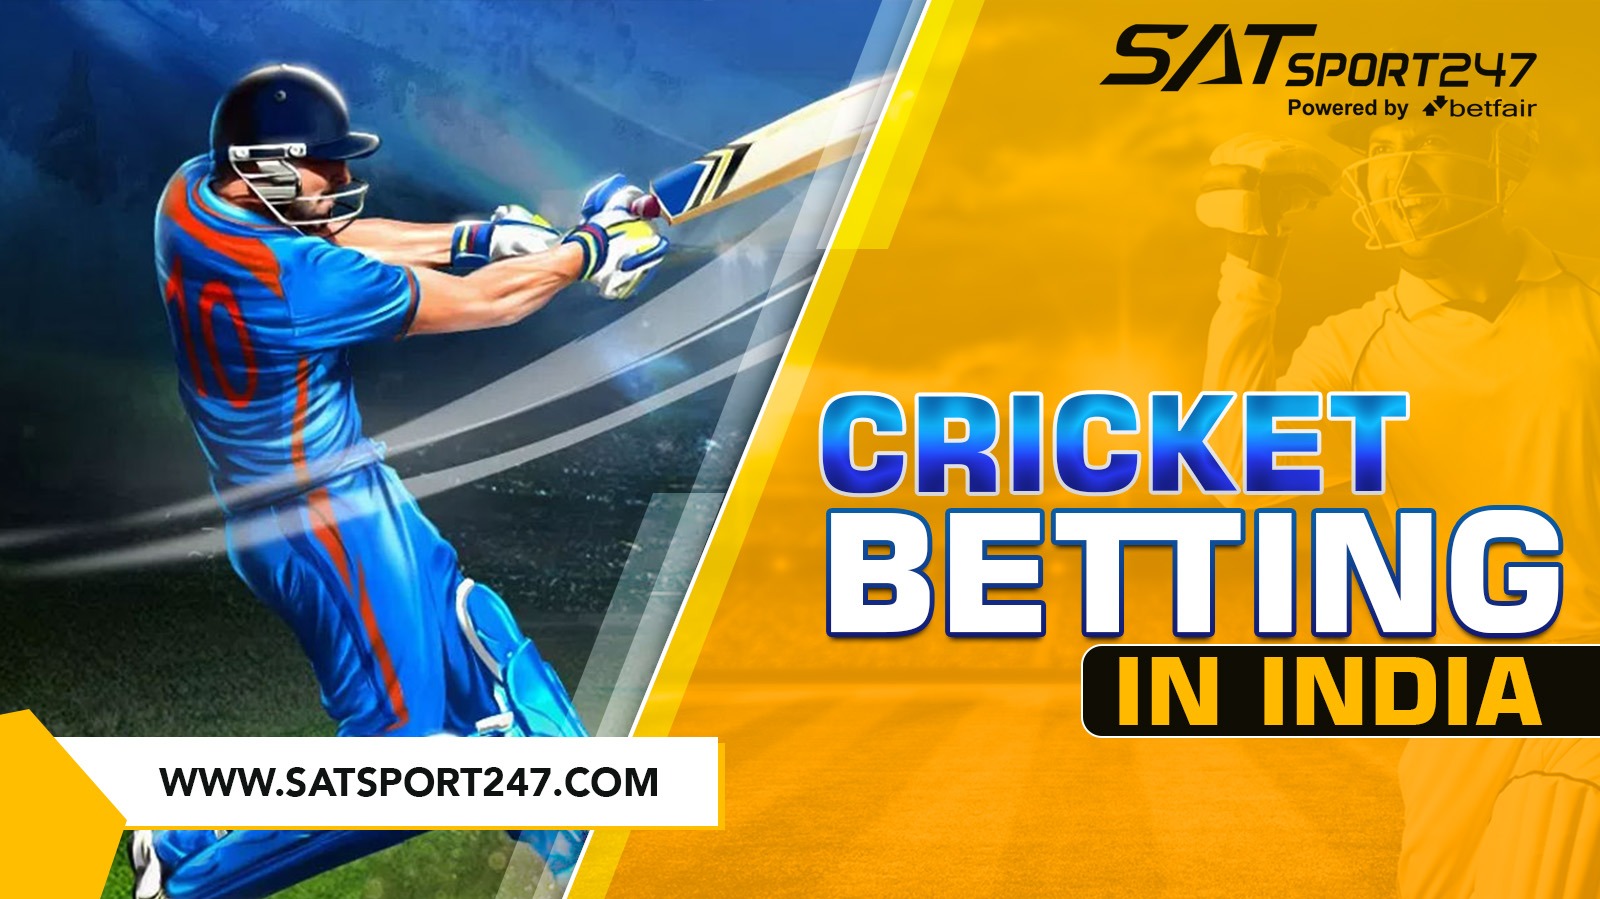 Satsport247 Login - Official Betting and Casino Website in India